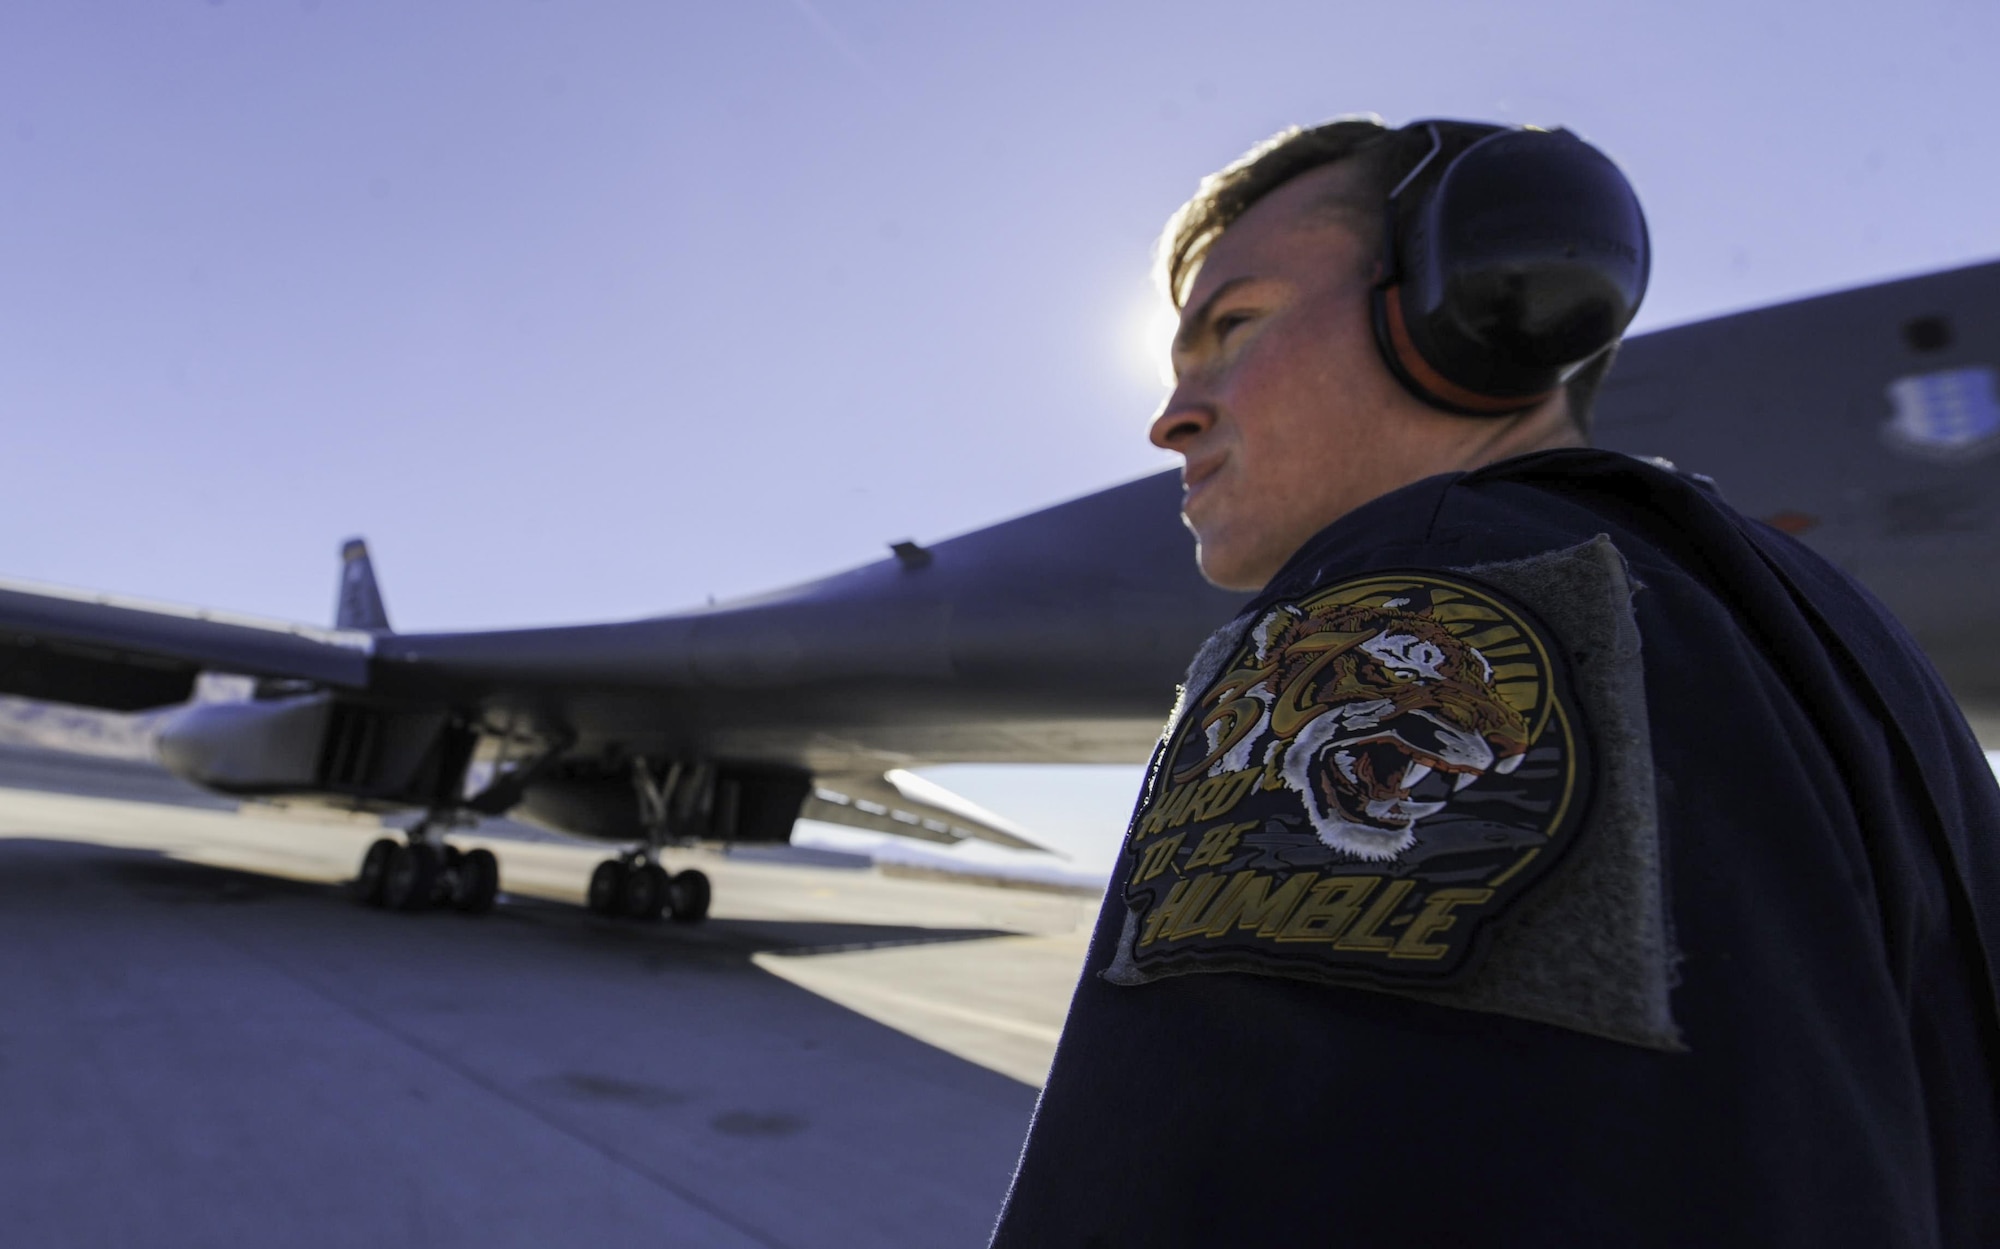 Senior Airman Jacob Widtmannheiser, a crew chief assigned to the 28th Aircraft Maintenance Squadron, Ellsworth Air Force Base, S.D., prepares a B-1B Lancer for take-off during Red Flag 17-1 on Nellis Air Force Base, Nev., Jan. 27, 2017. Red Flag is one of a series of advanced training programs administered by the U.S. Air Force Warfare Center to train aircrews. (U.S. Air Force photo by Airman 1st Class Kevin Tanenbaum/Released)